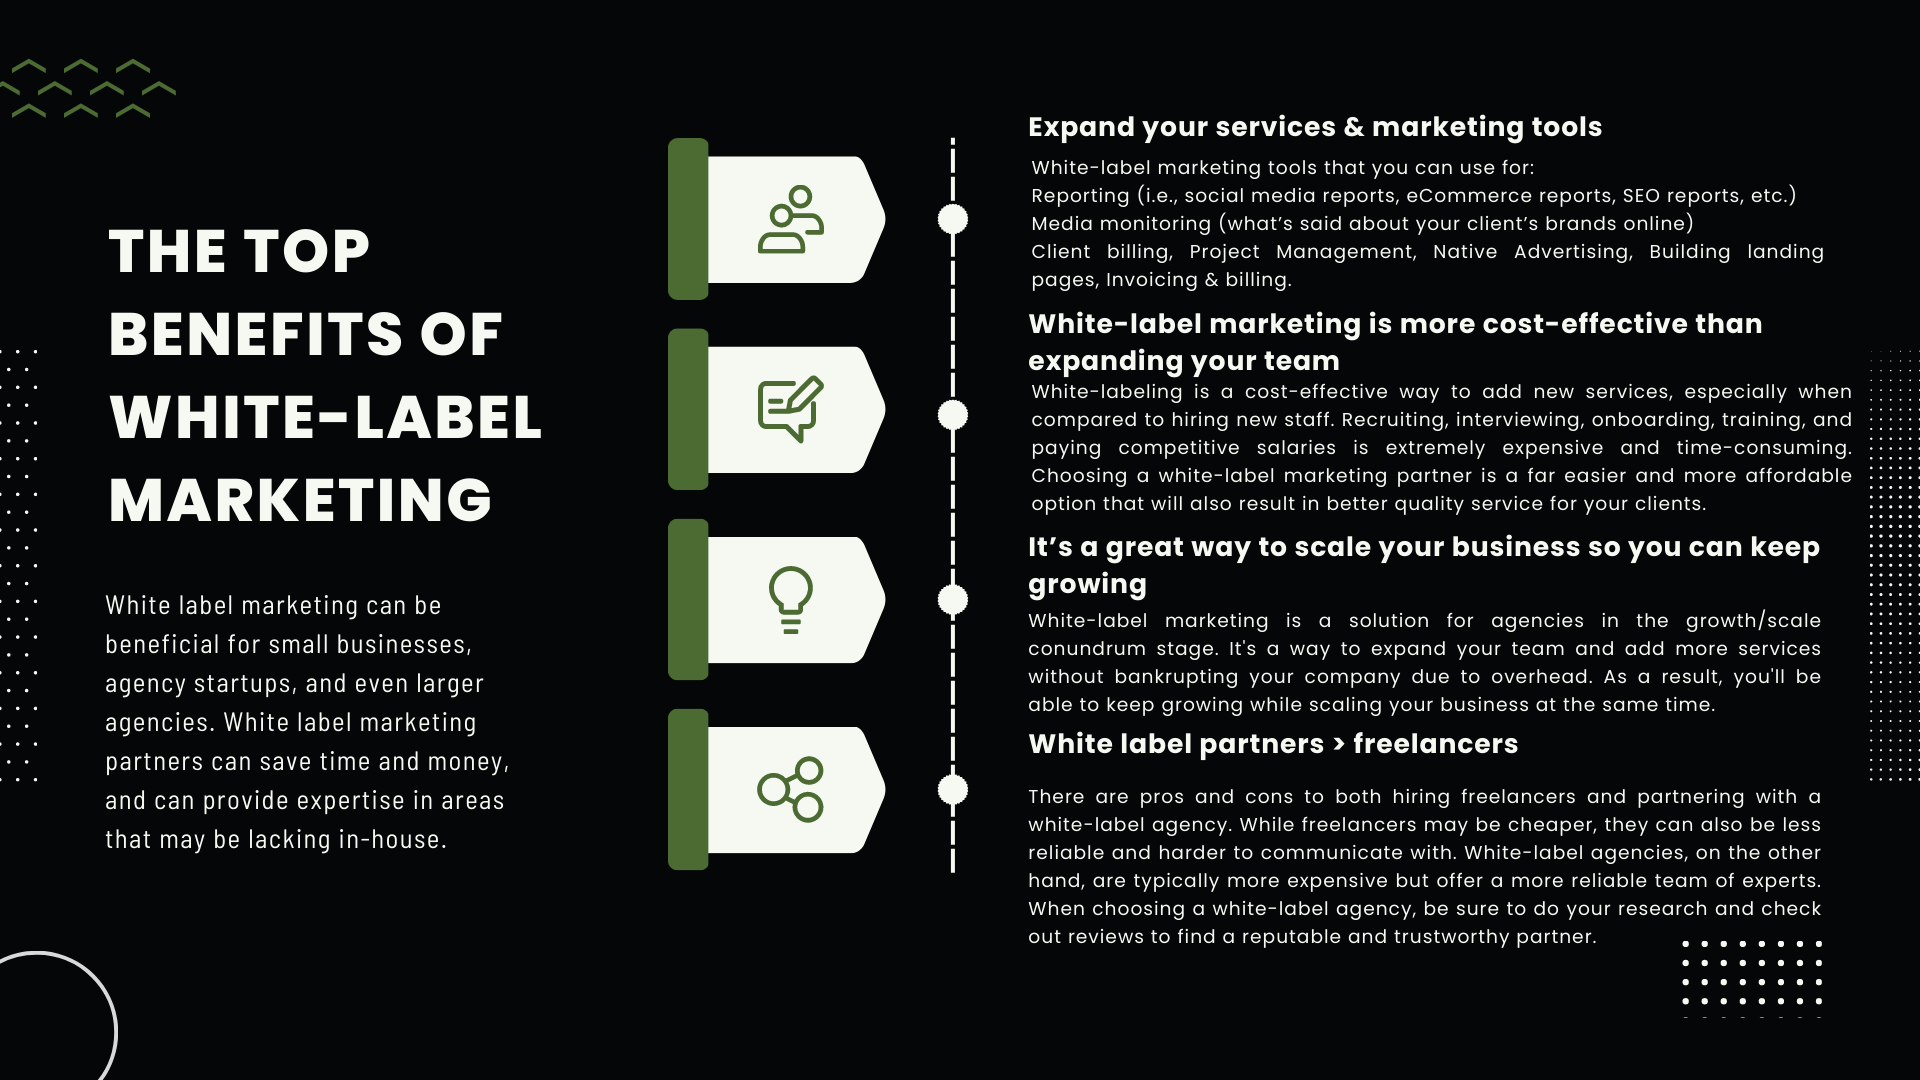 infographic on The Top Benefits of White-Label Marketing 